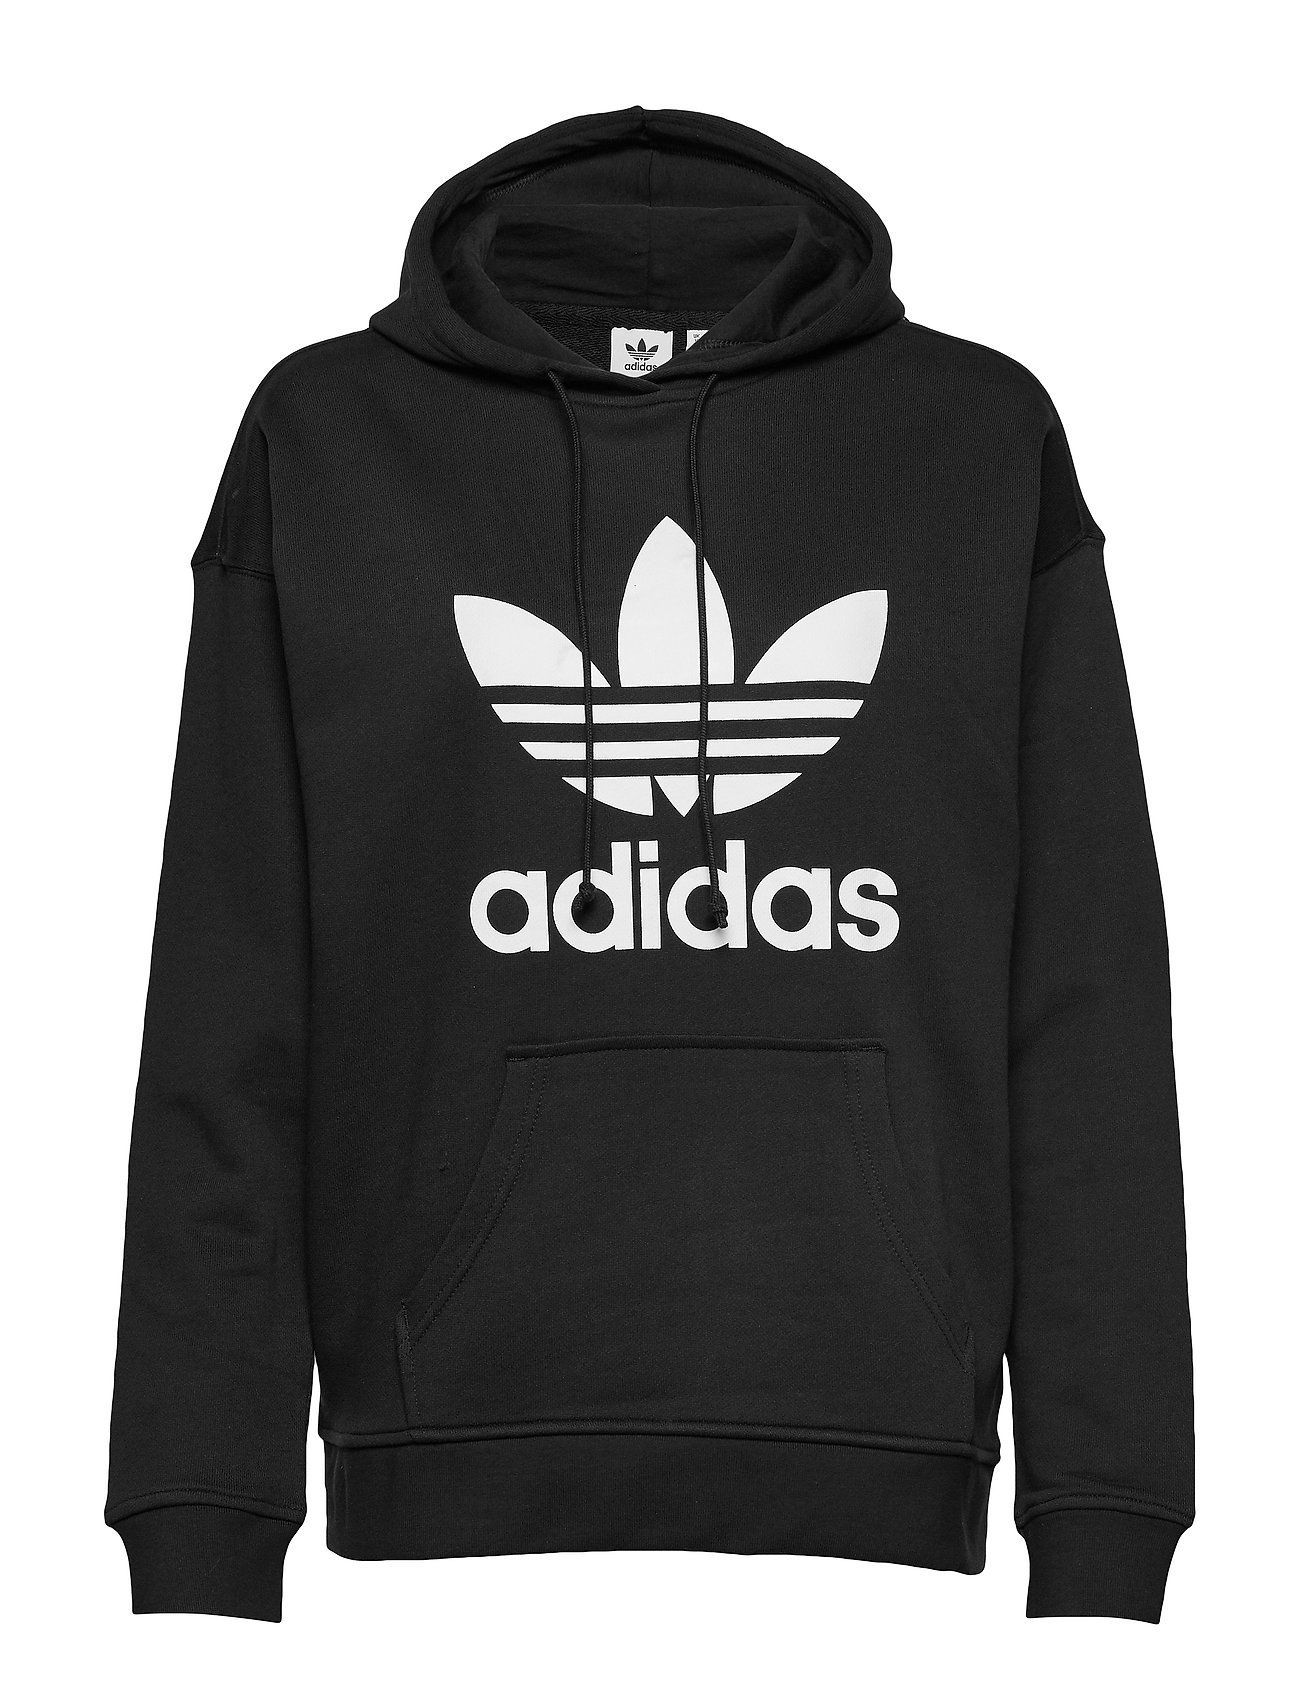 adidas hoodie outlet